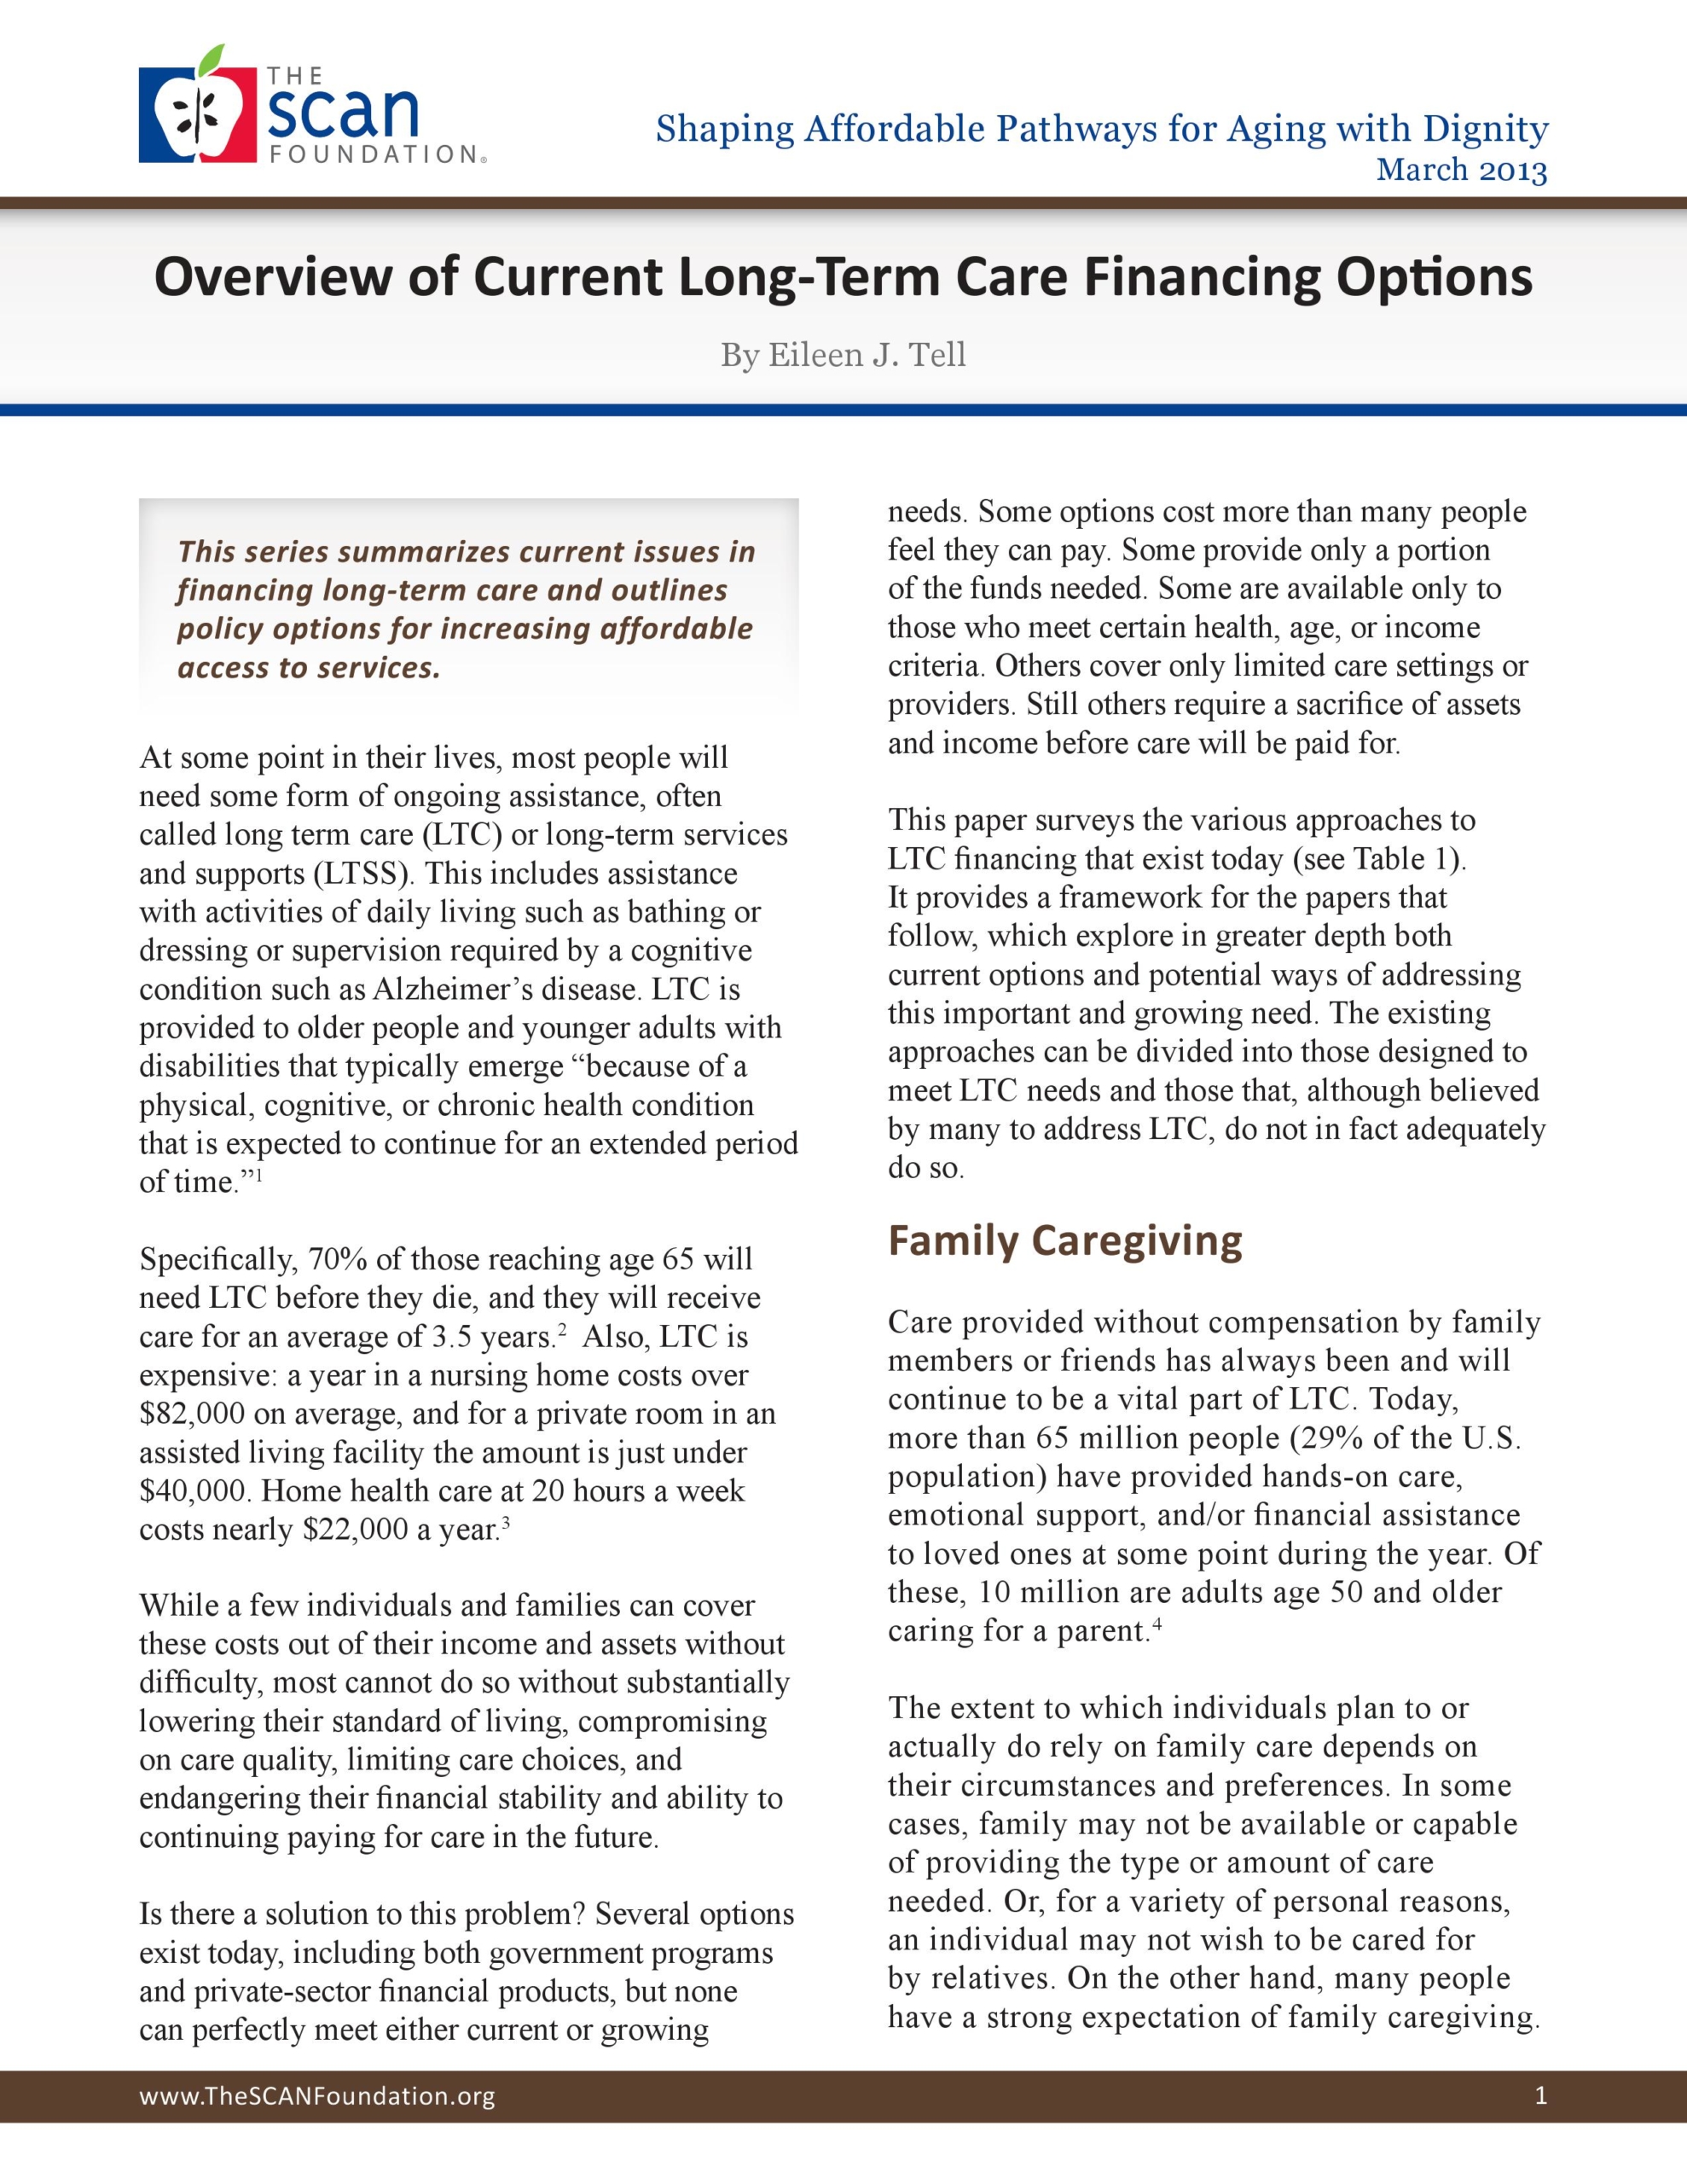 Overview of Current Long-Term Care Financing Options